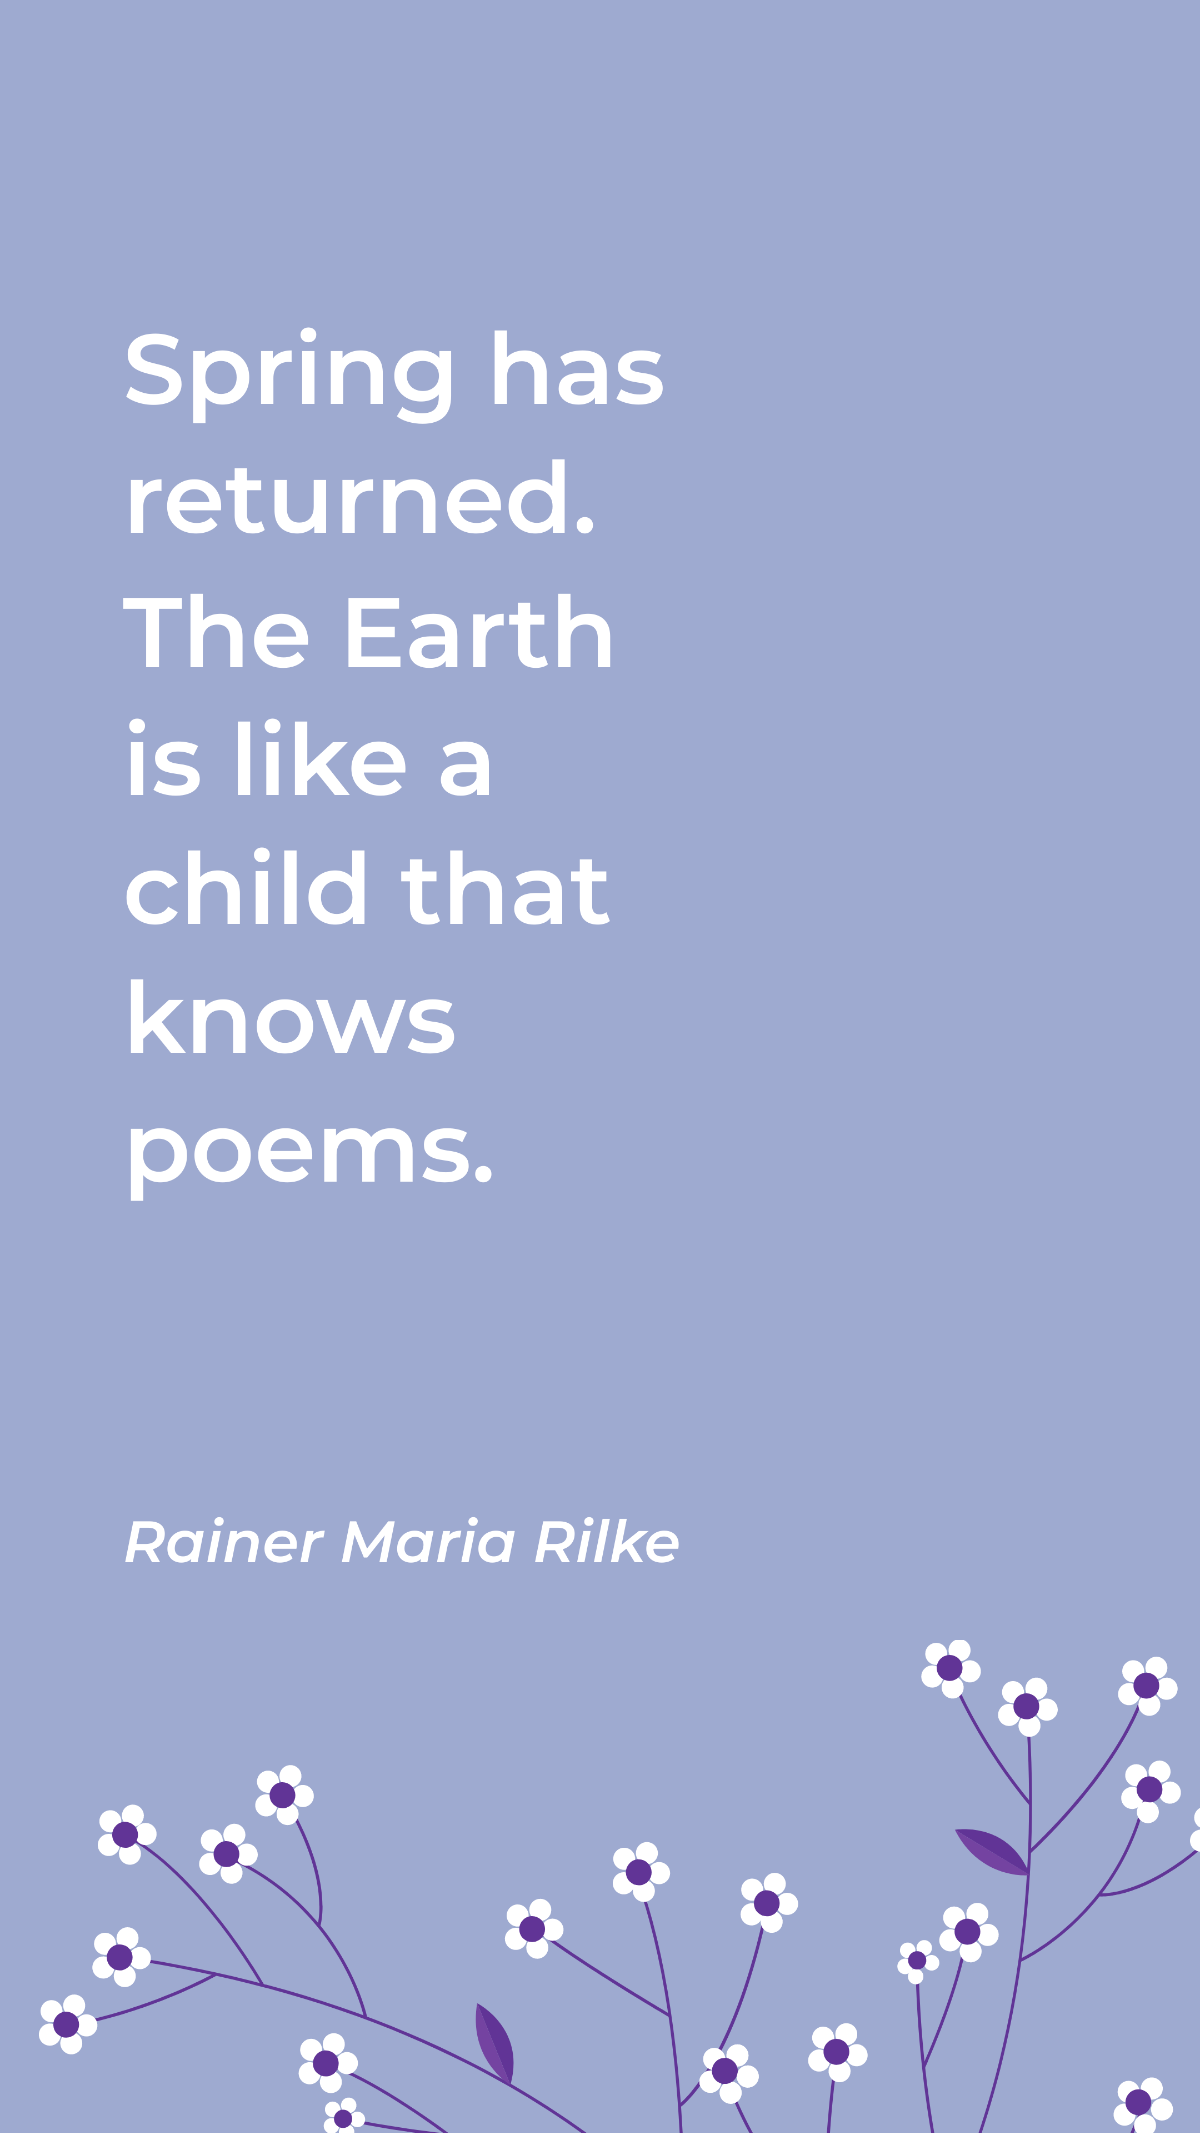 Free Rainer Maria Rilke - Spring has returned. The Earth is like a child that knows poems. Template